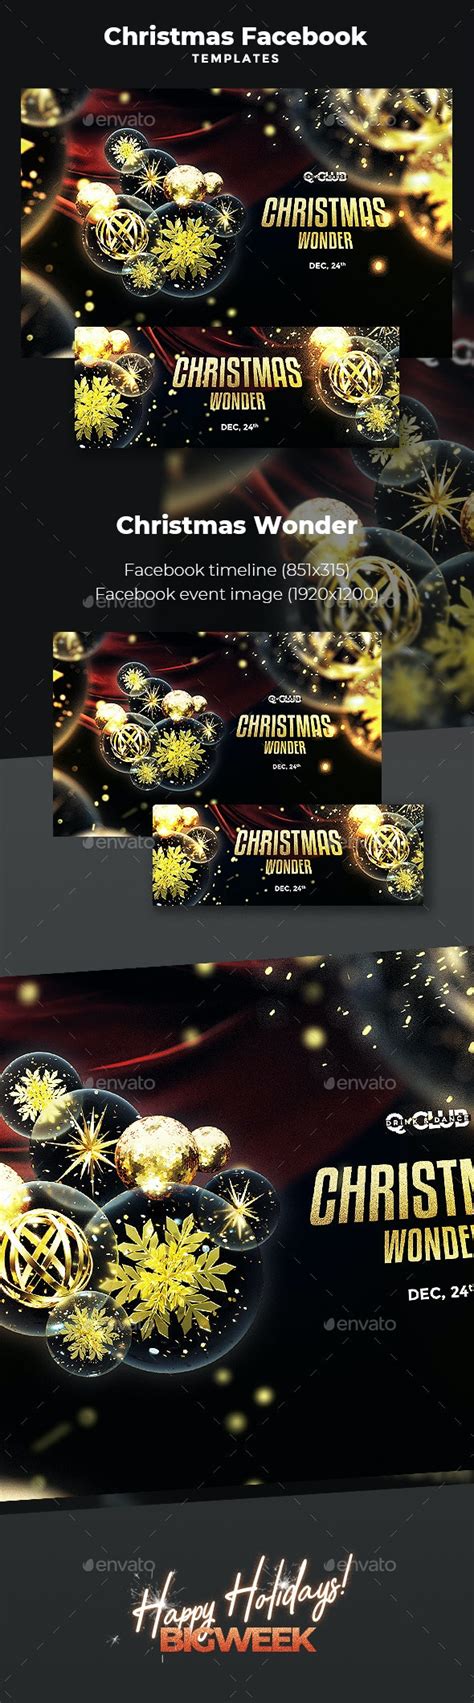 Christmas Facebook Covers By Bigweek Graphicriver